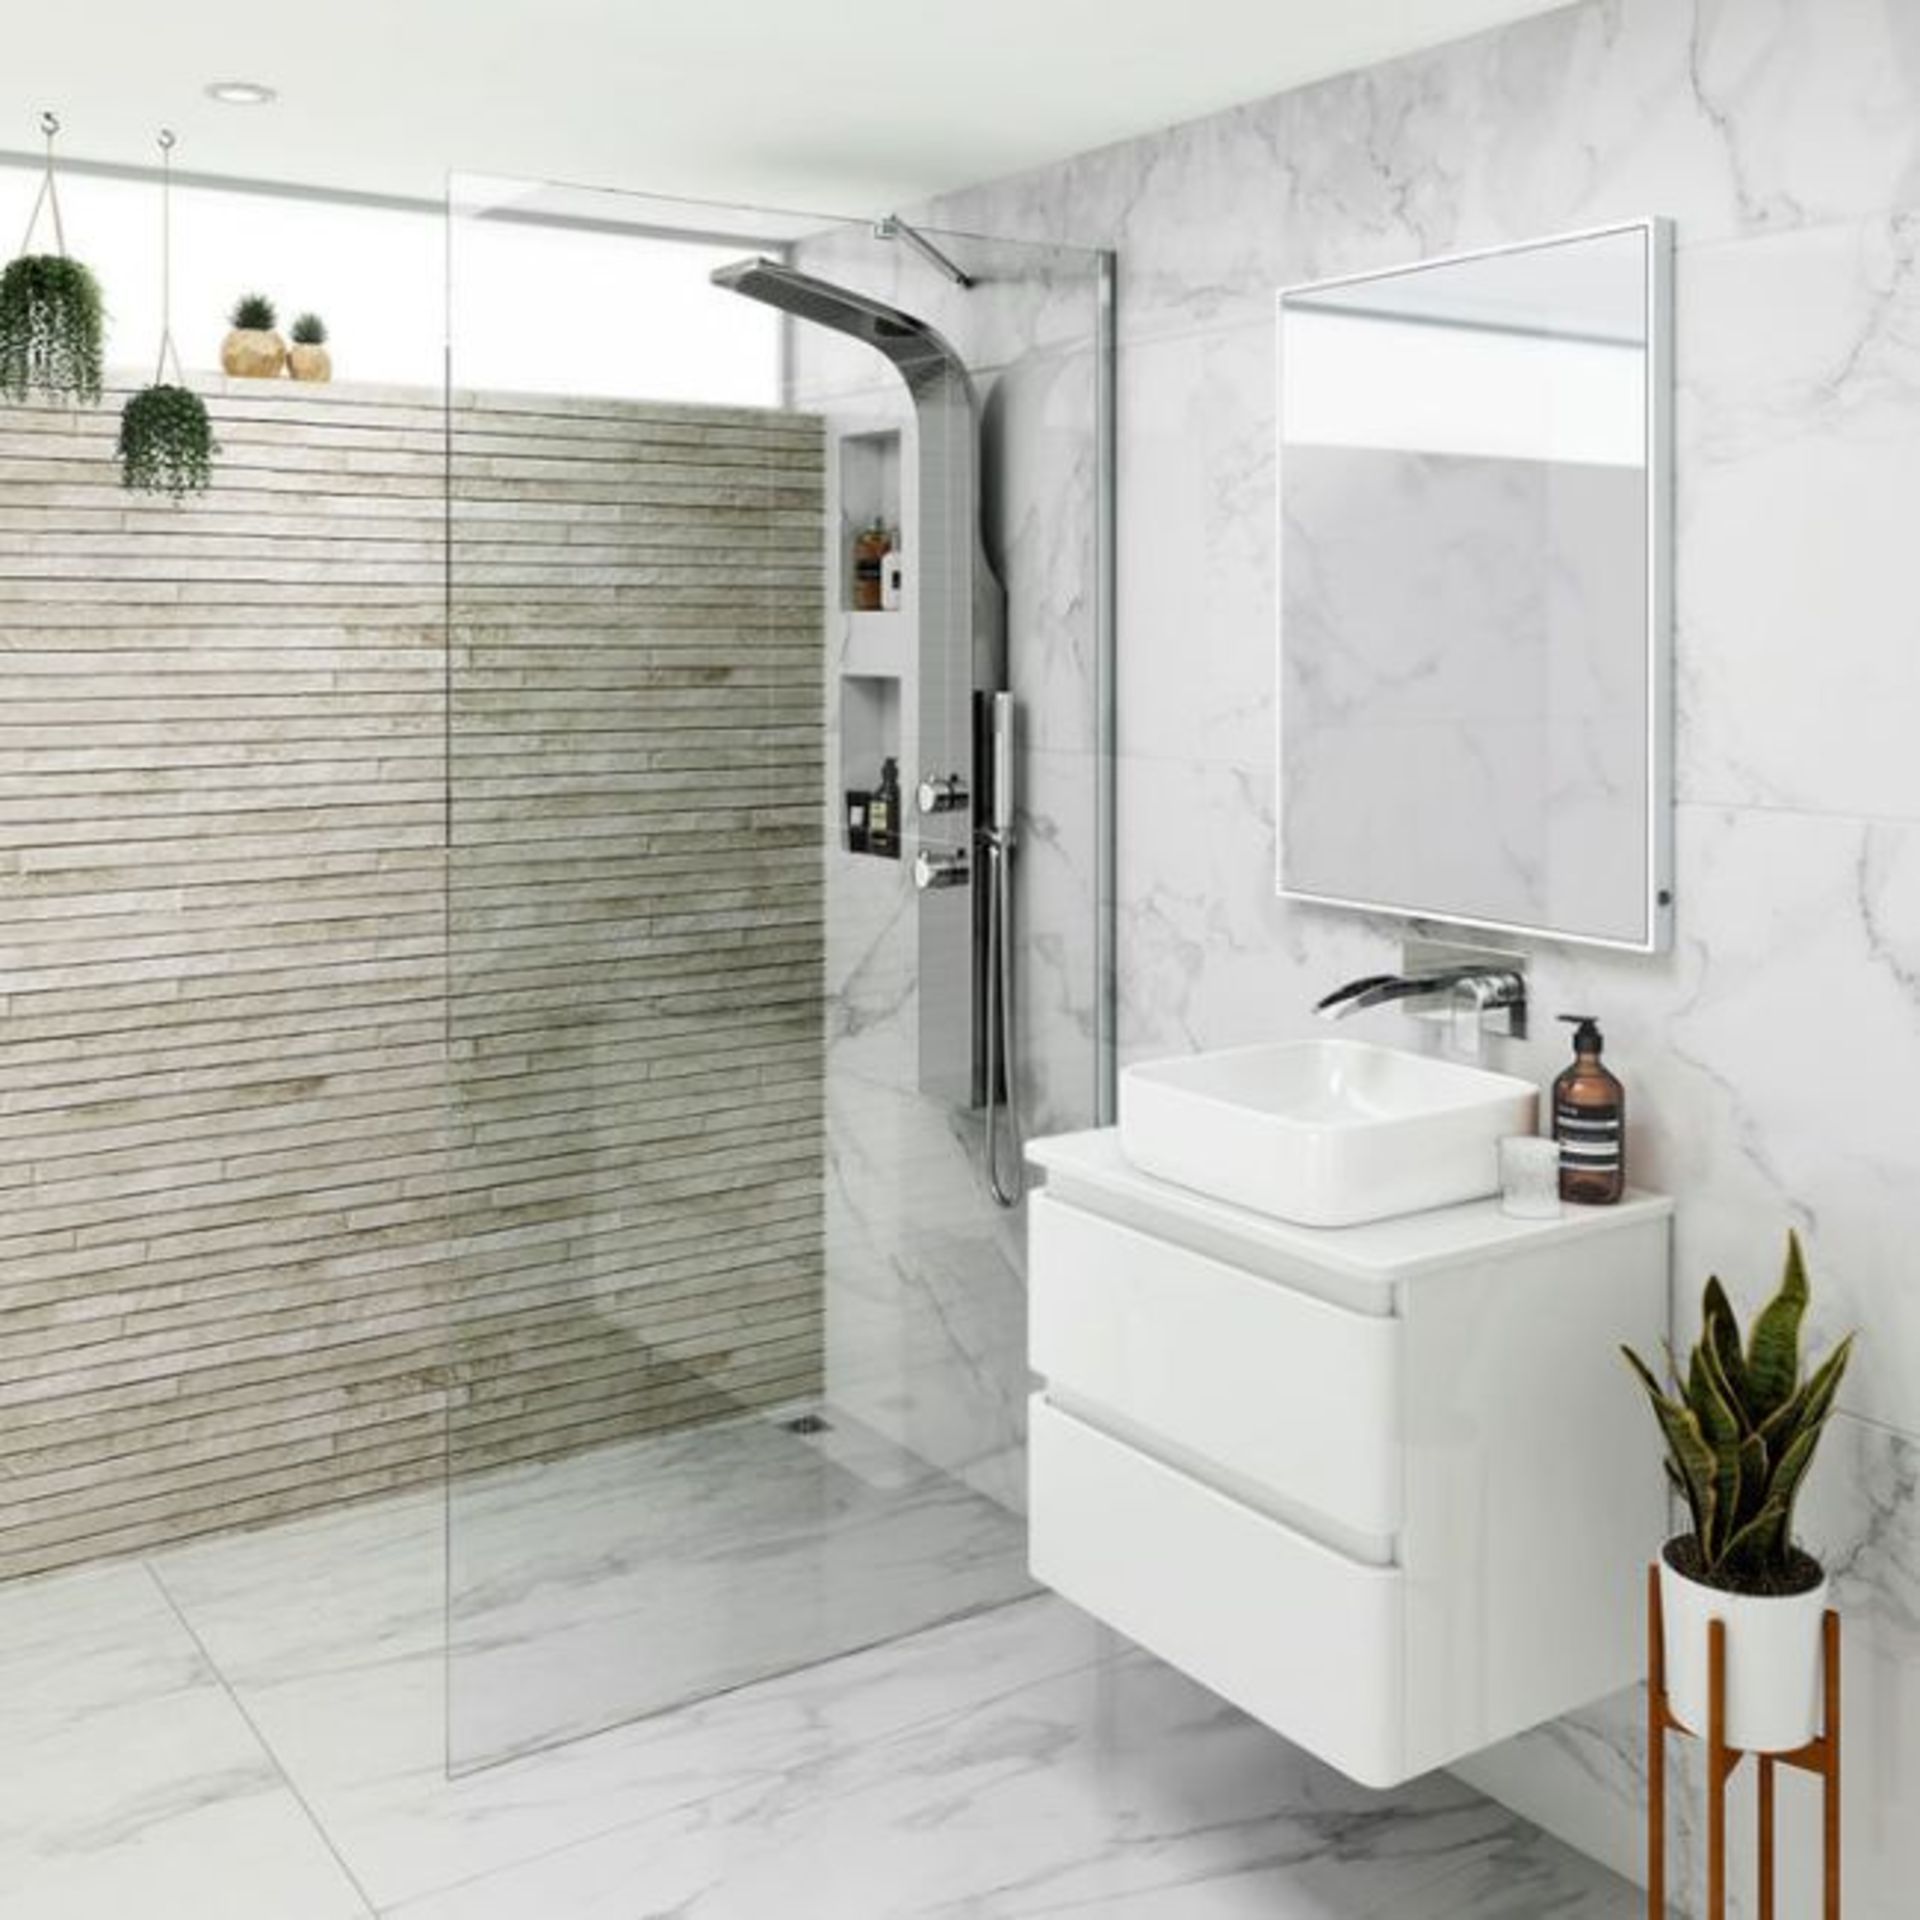 New (W75) 1000mm - 8mm - Premium Easy clean Wet room Panel. RRP £499.99. 8mm Easy clean Glass ... - Image 2 of 2